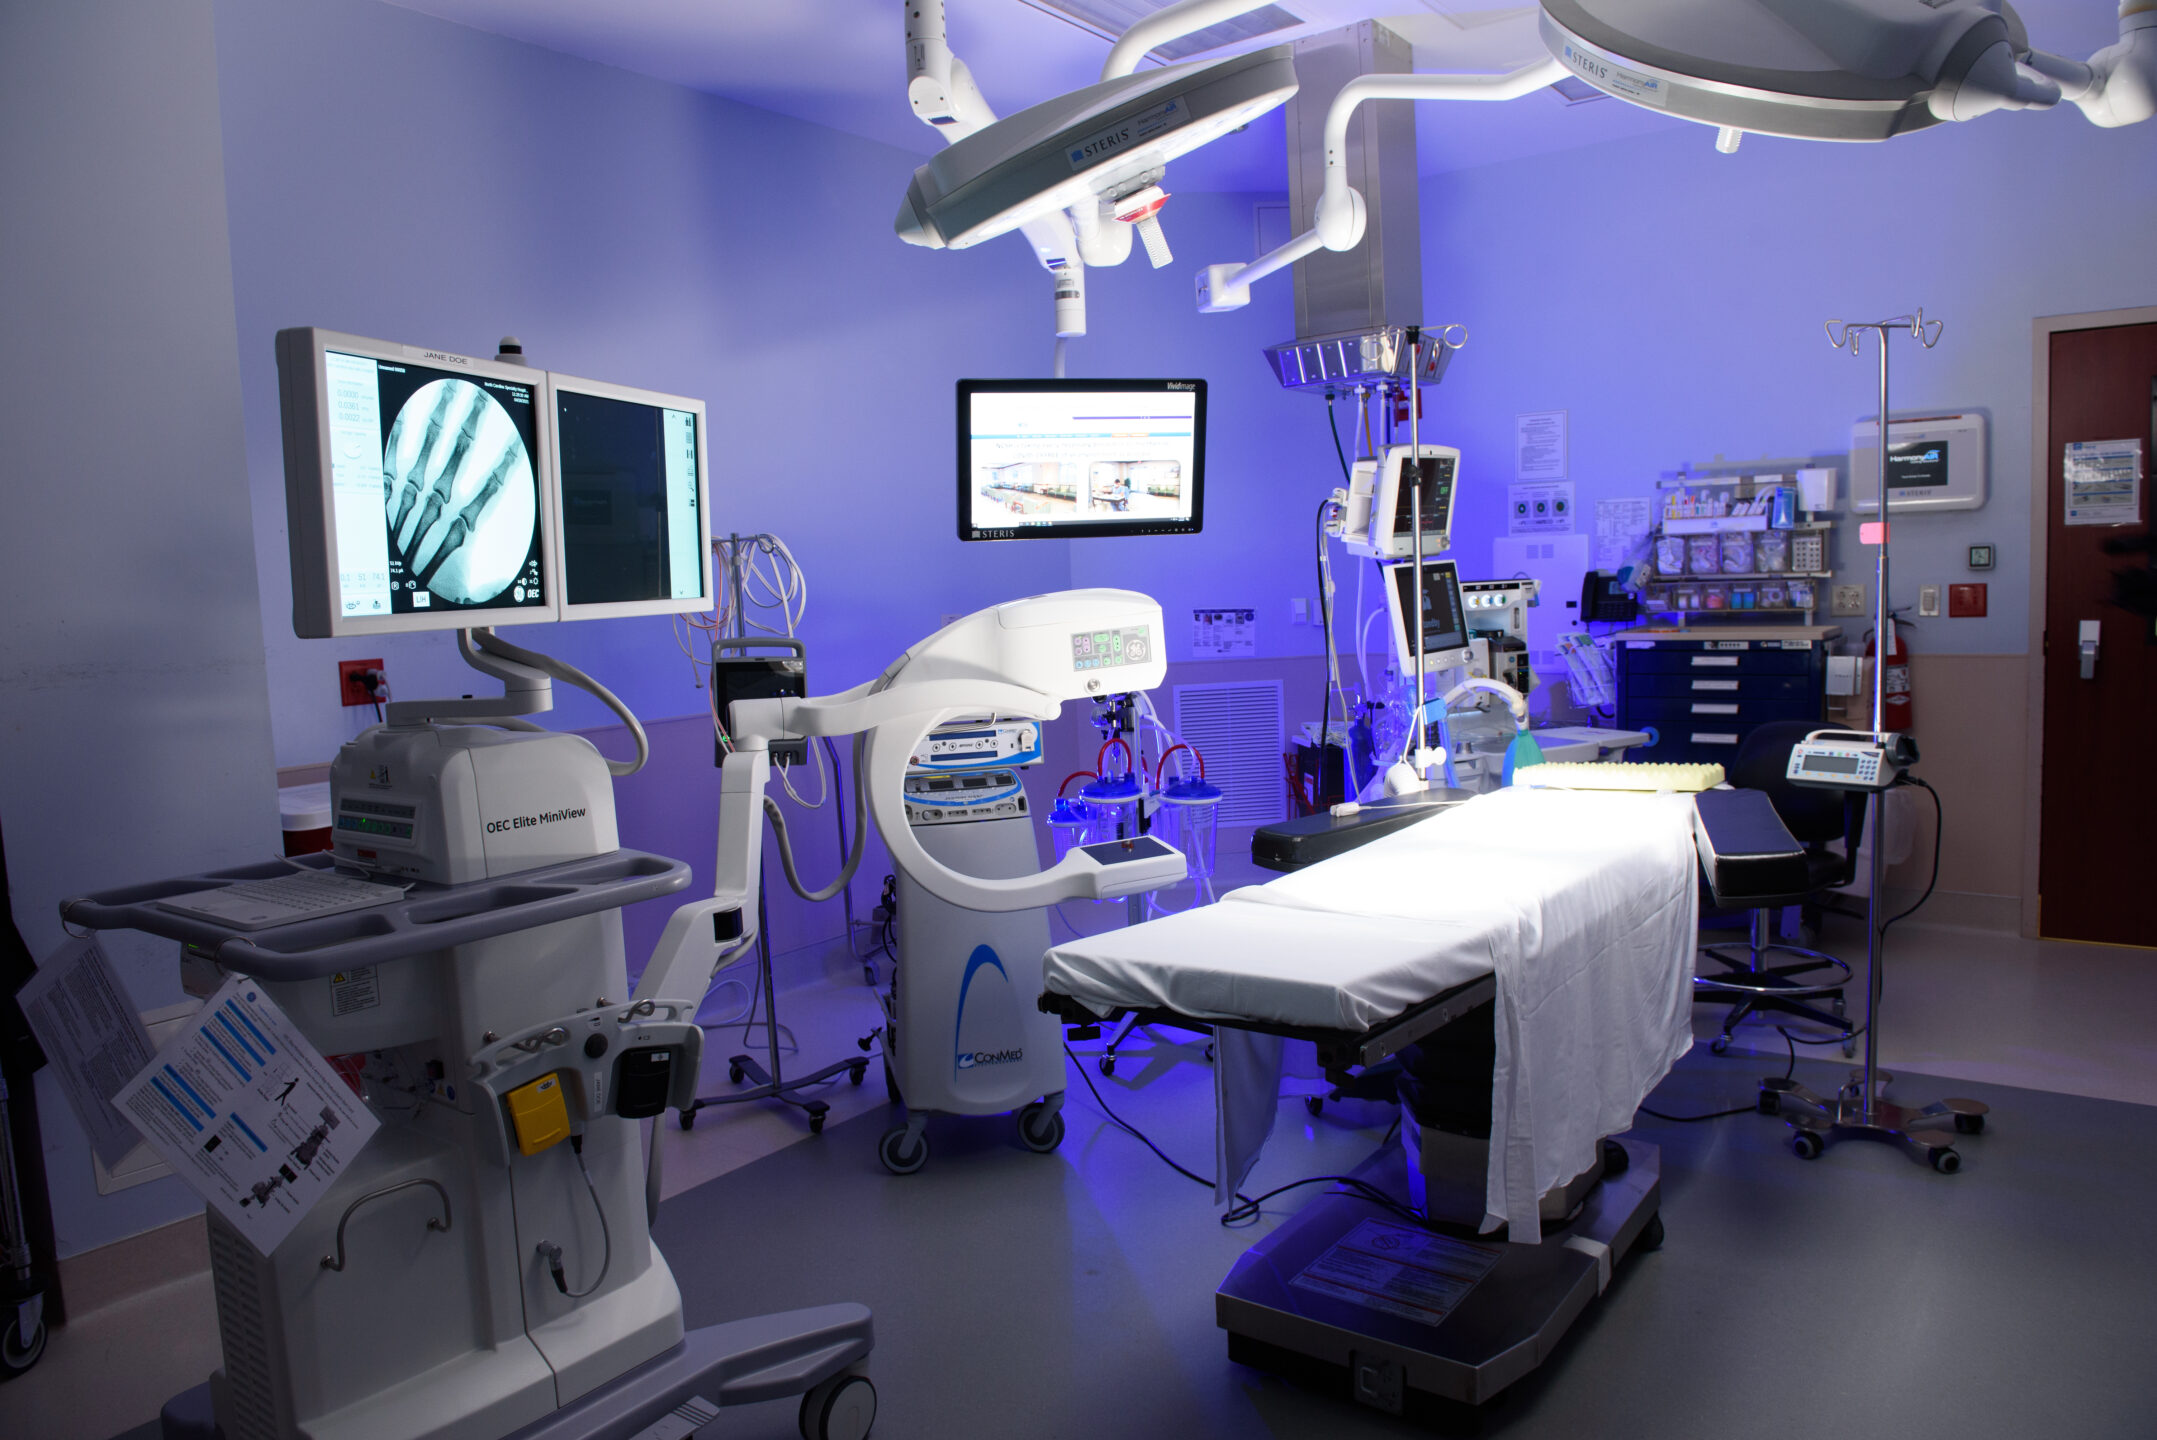 A surgery room with bed, equipment, and X-ray images is lit with blue light. 